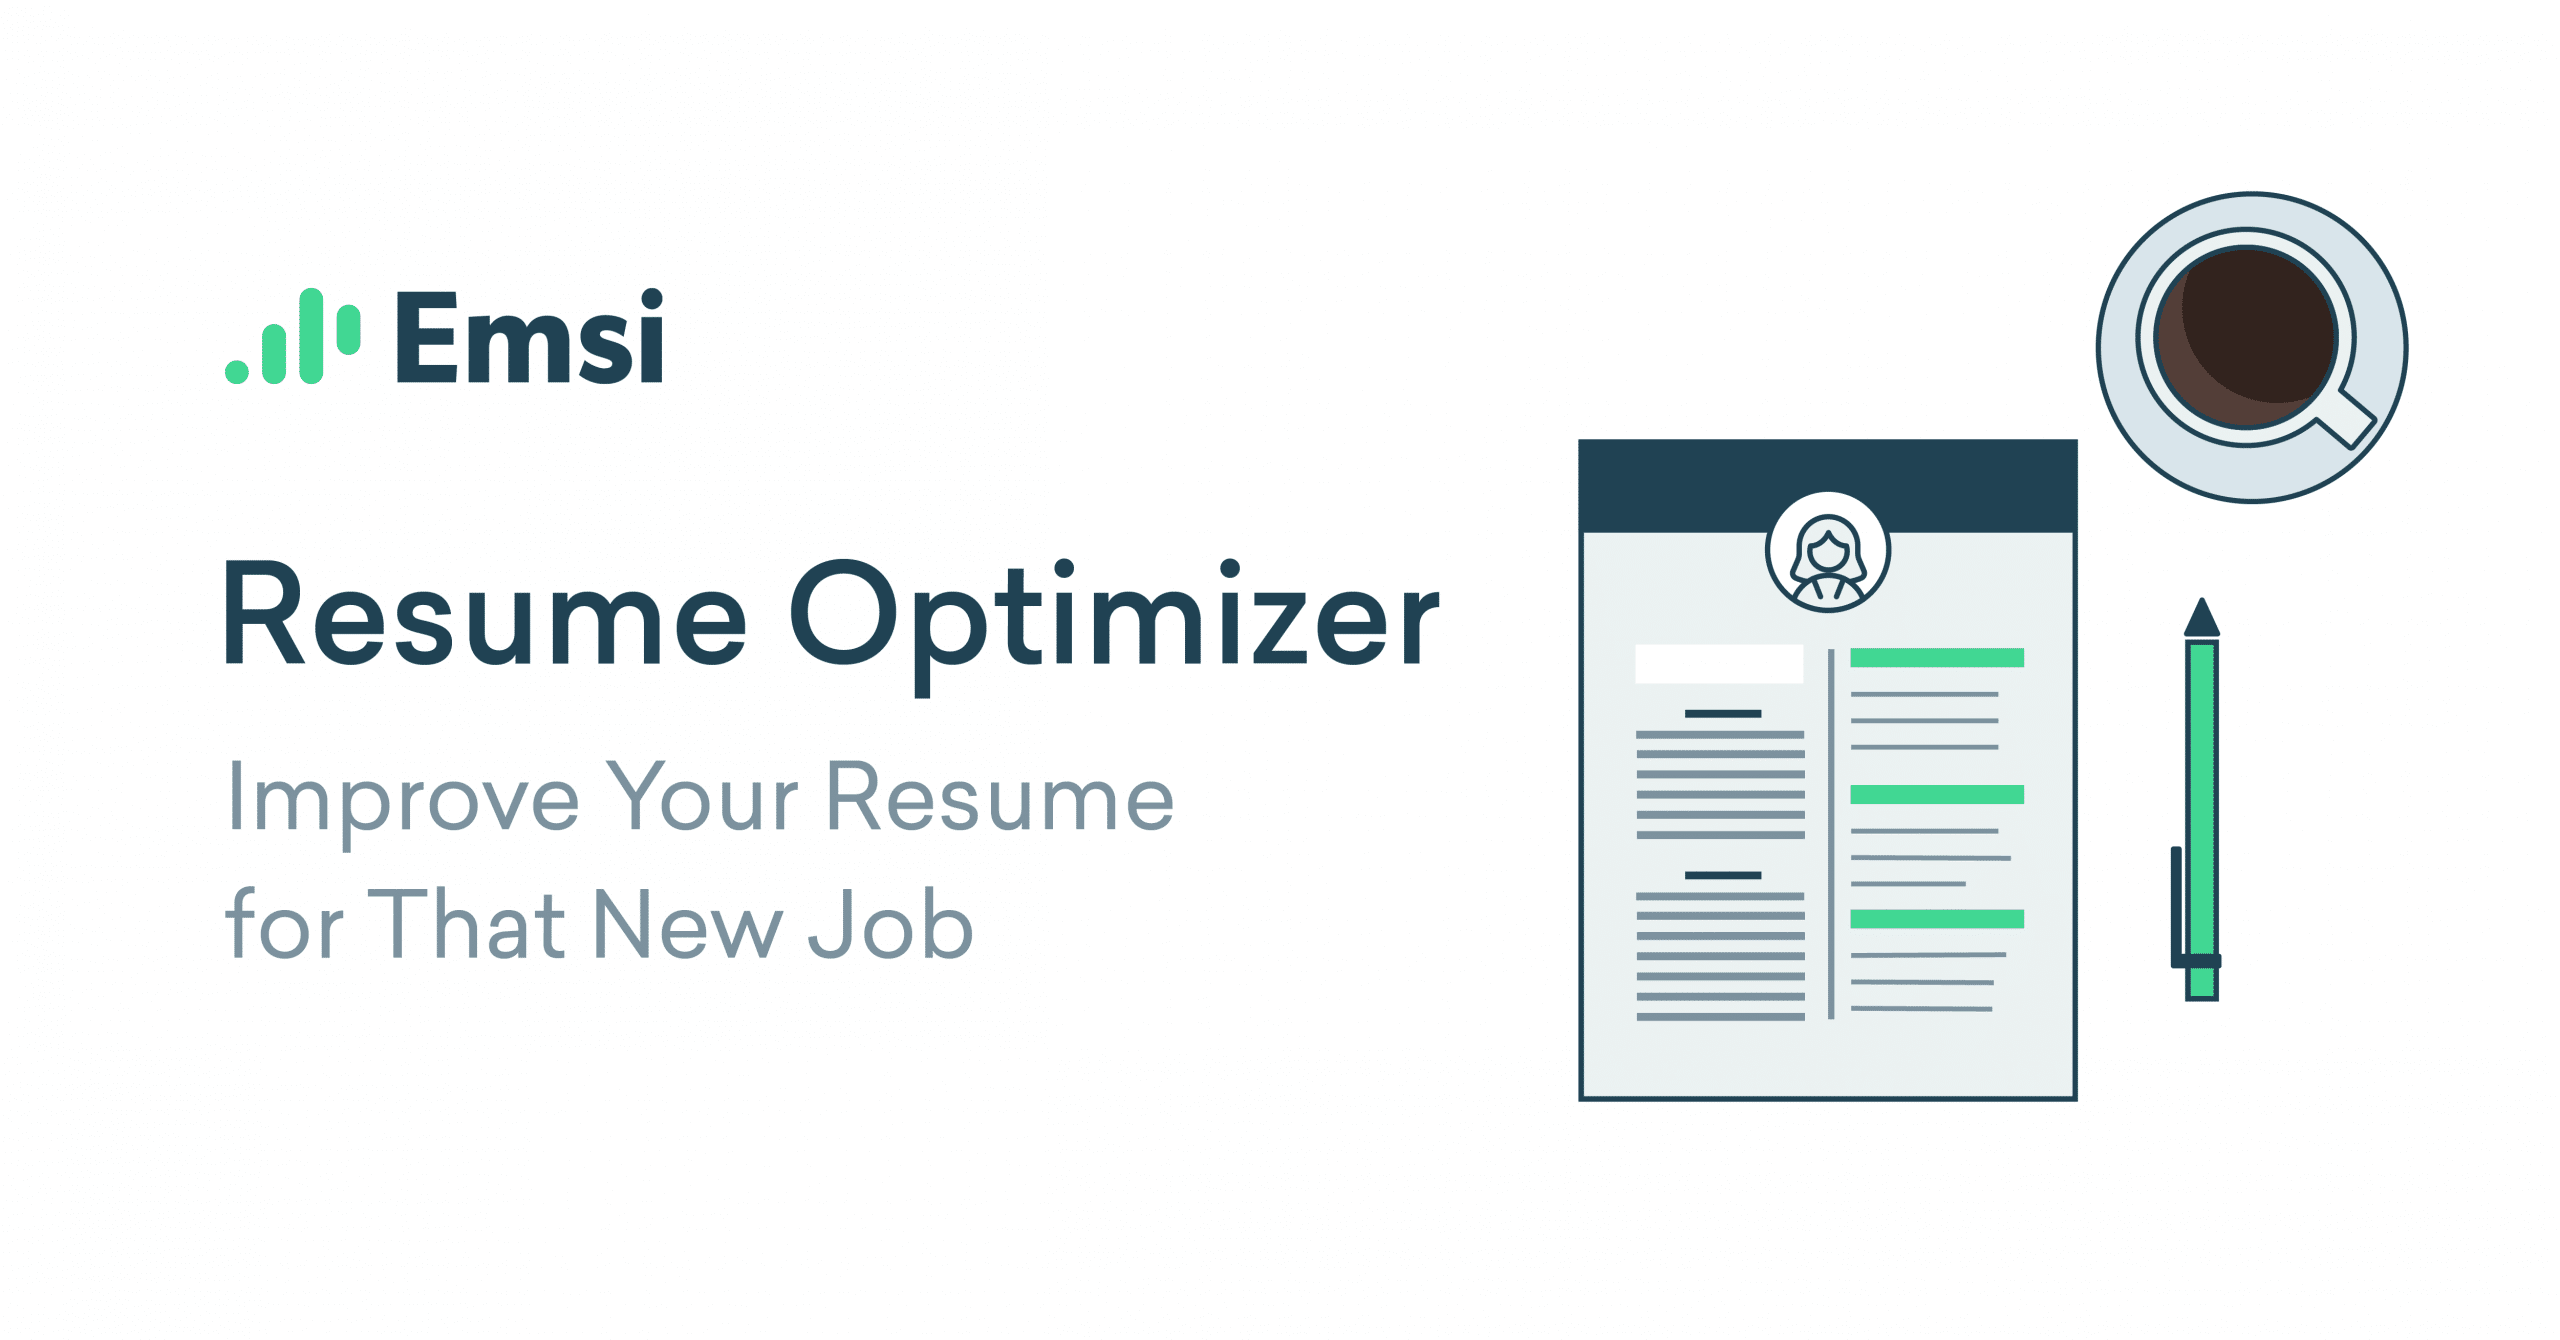 Resume Optimizer: Improve Your Resume for That New Job